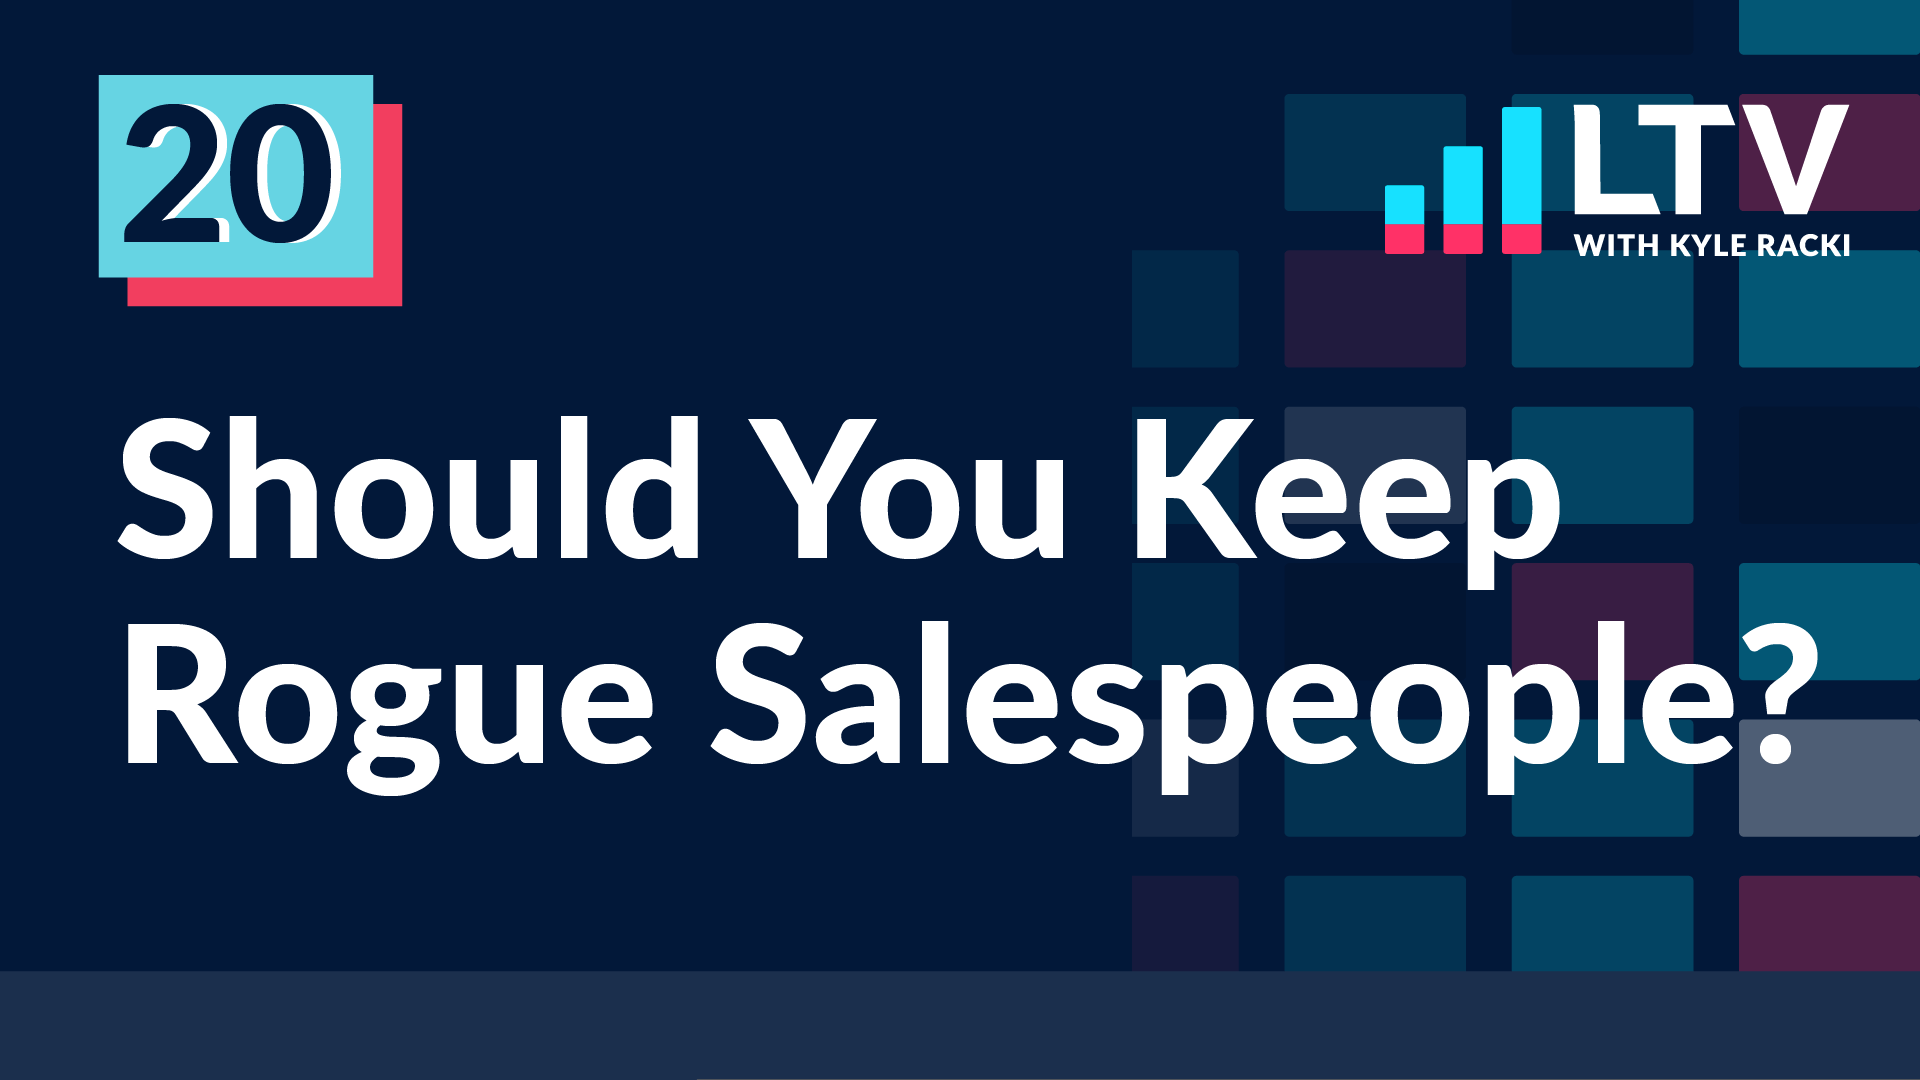 LTV Podcast Episode 20: Should You Keep Rogue Salespeople?